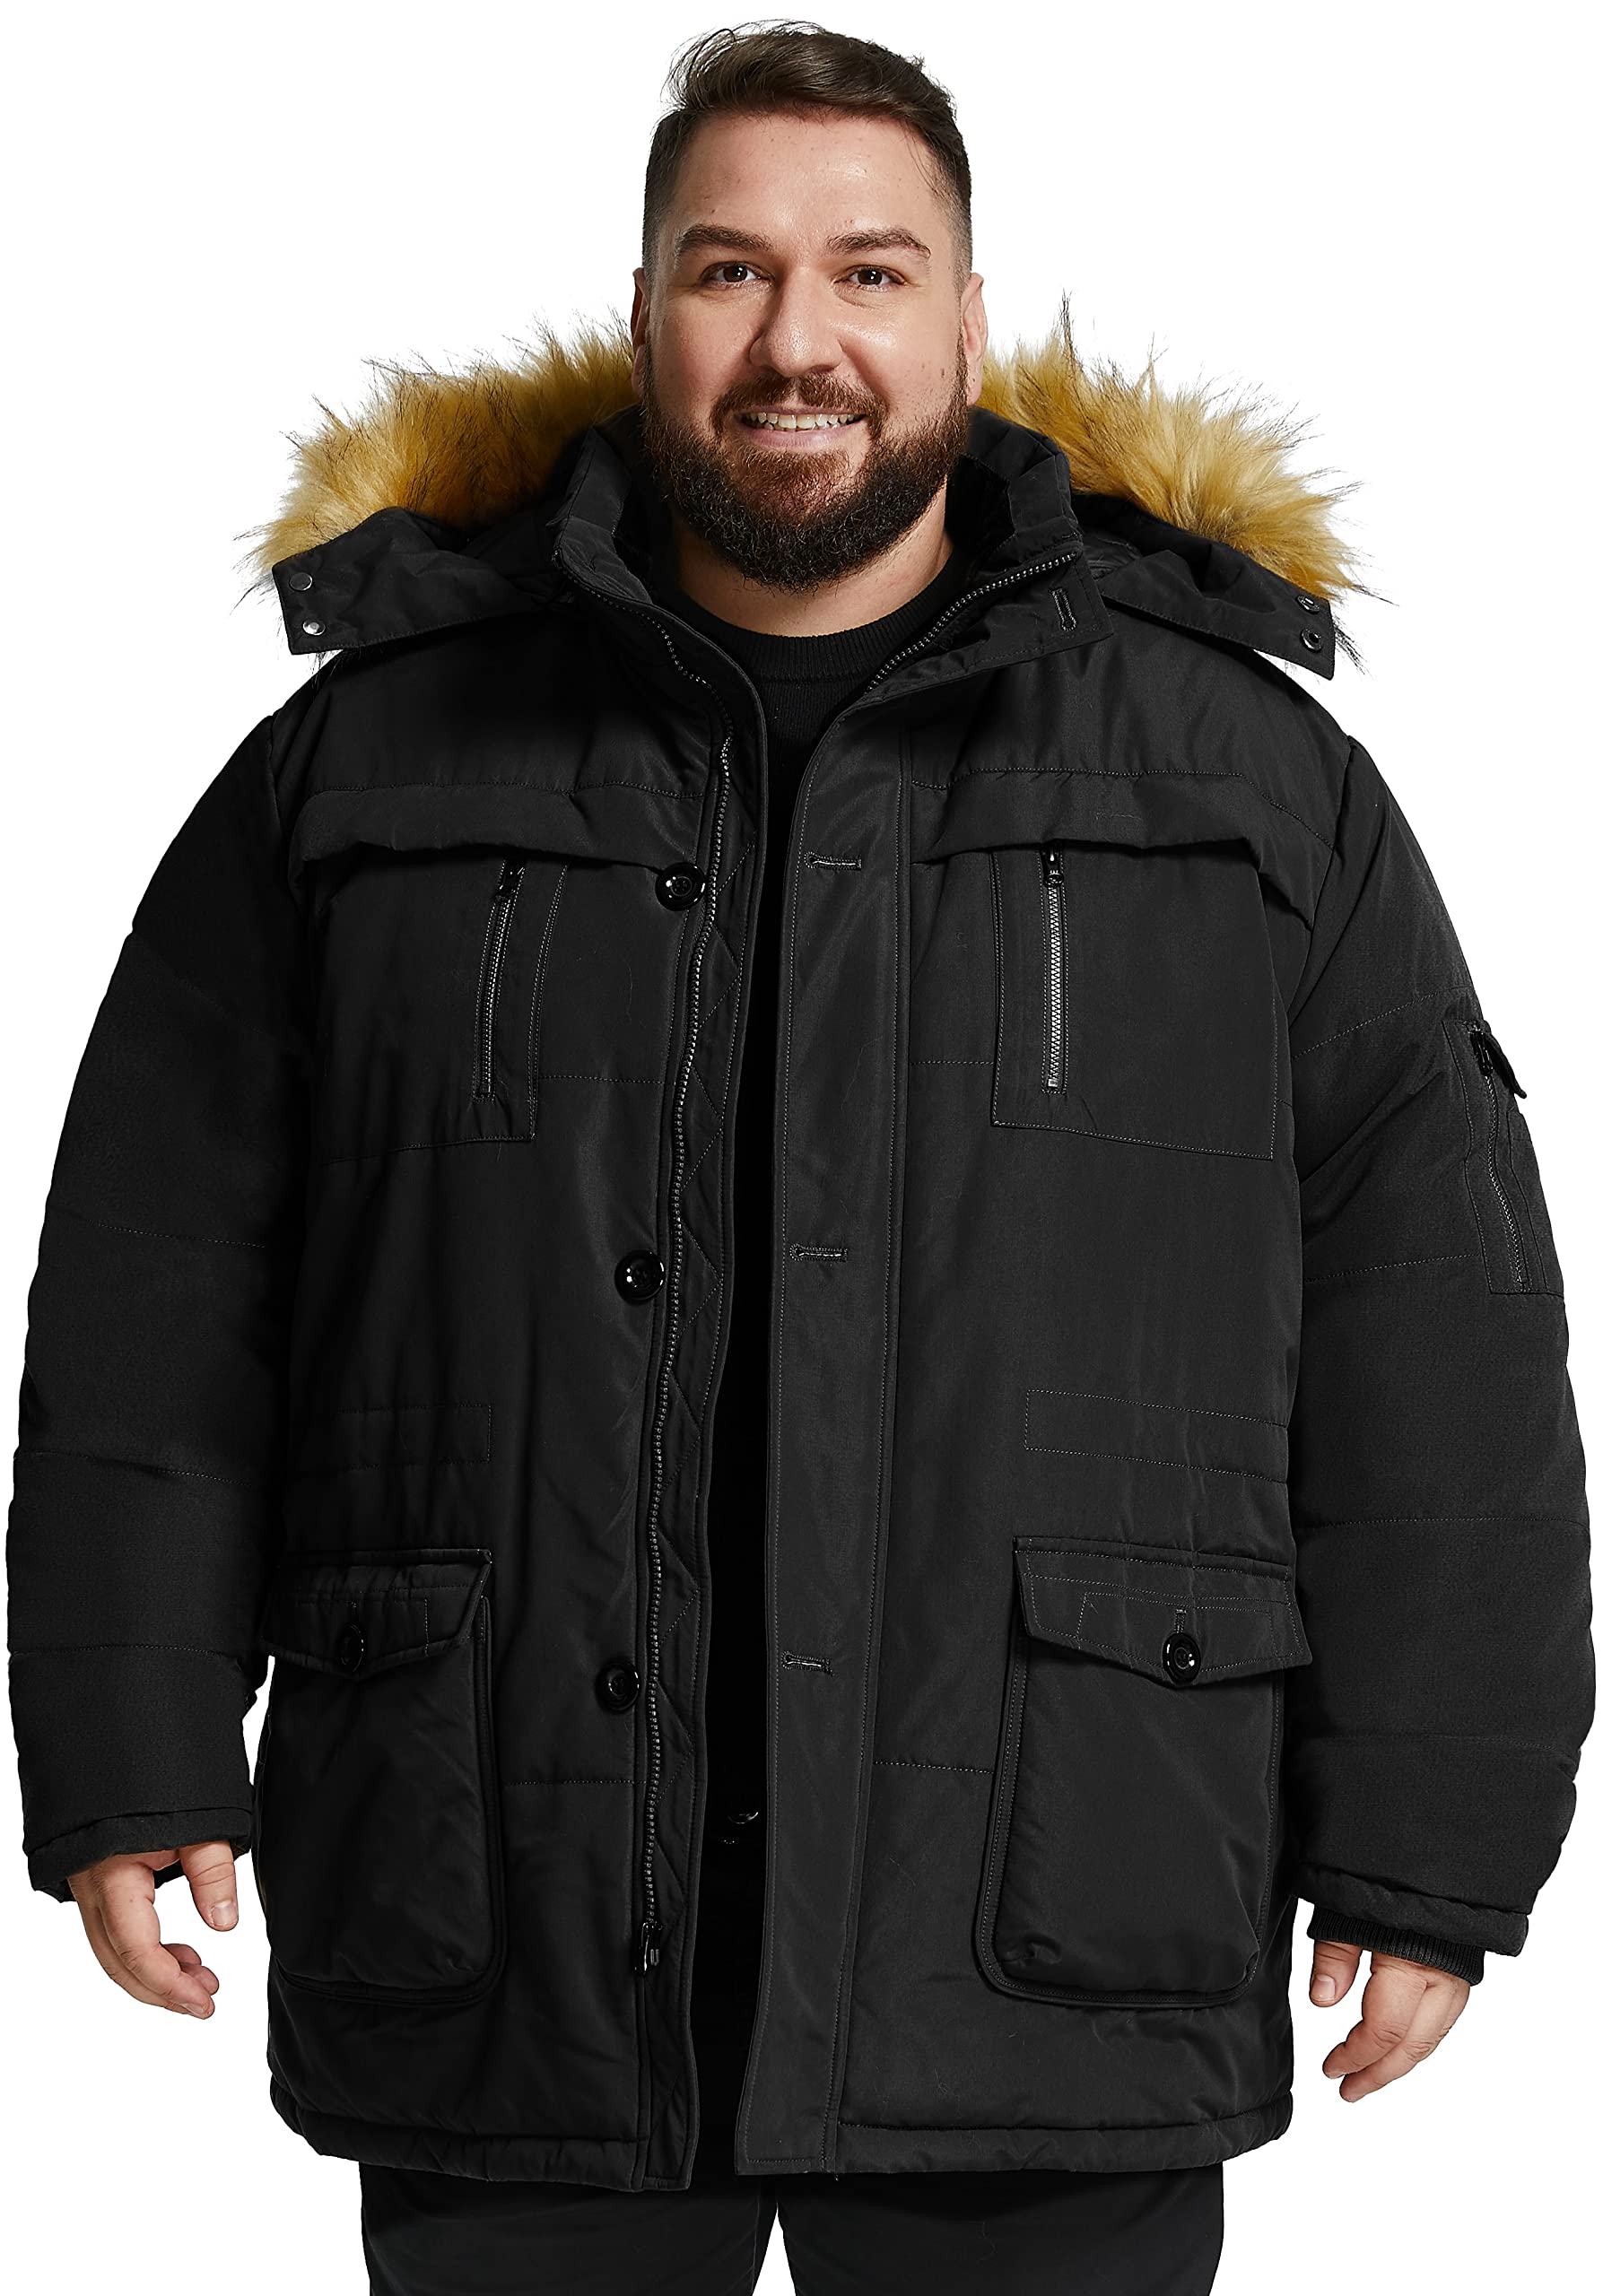 Soularge Men's Big and Tall Winter Warm Heavy Hooded Parka Jacket